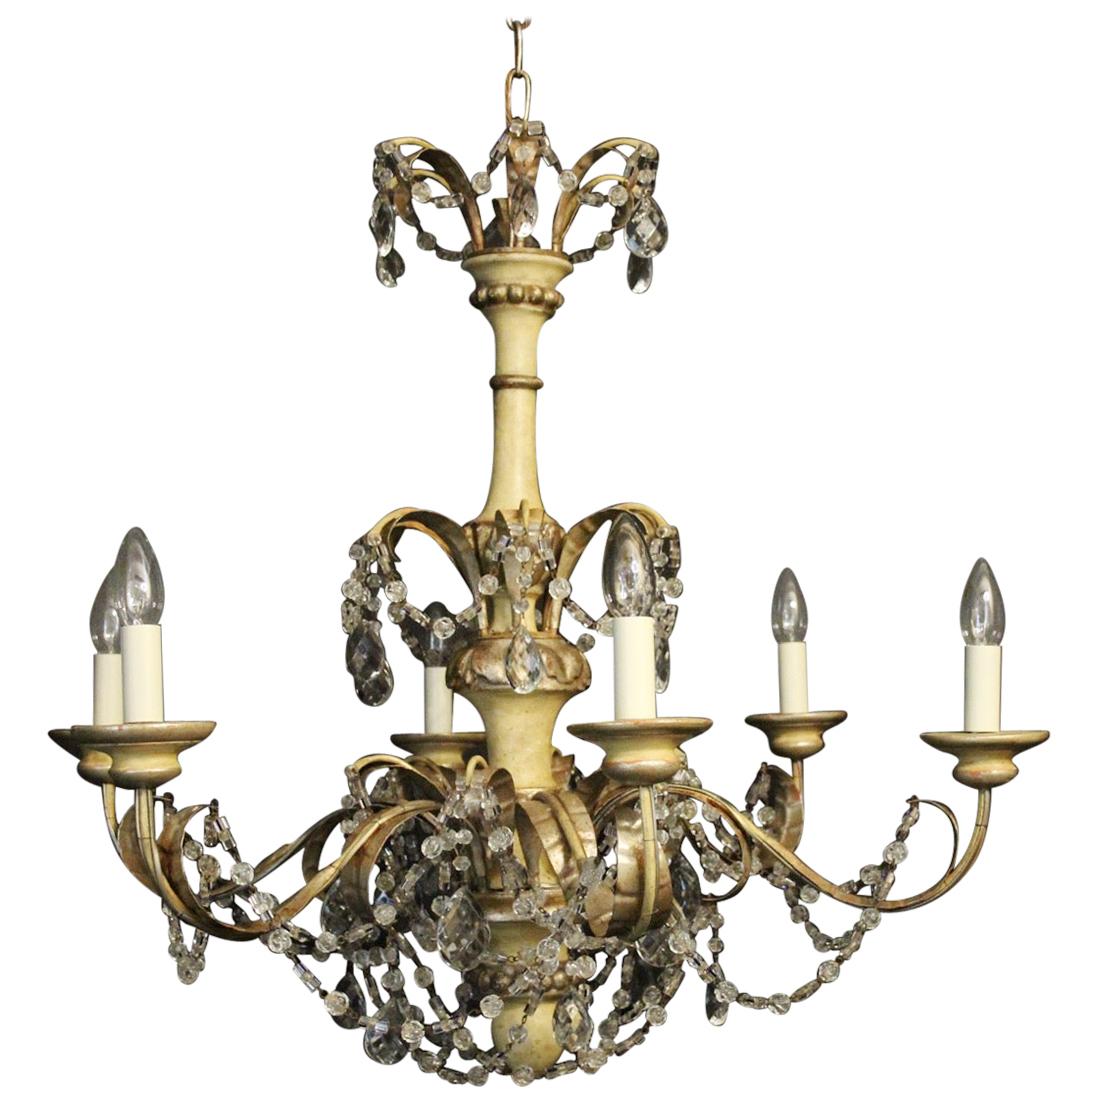 Italian Giltwood and Toleware Antique Chandelier